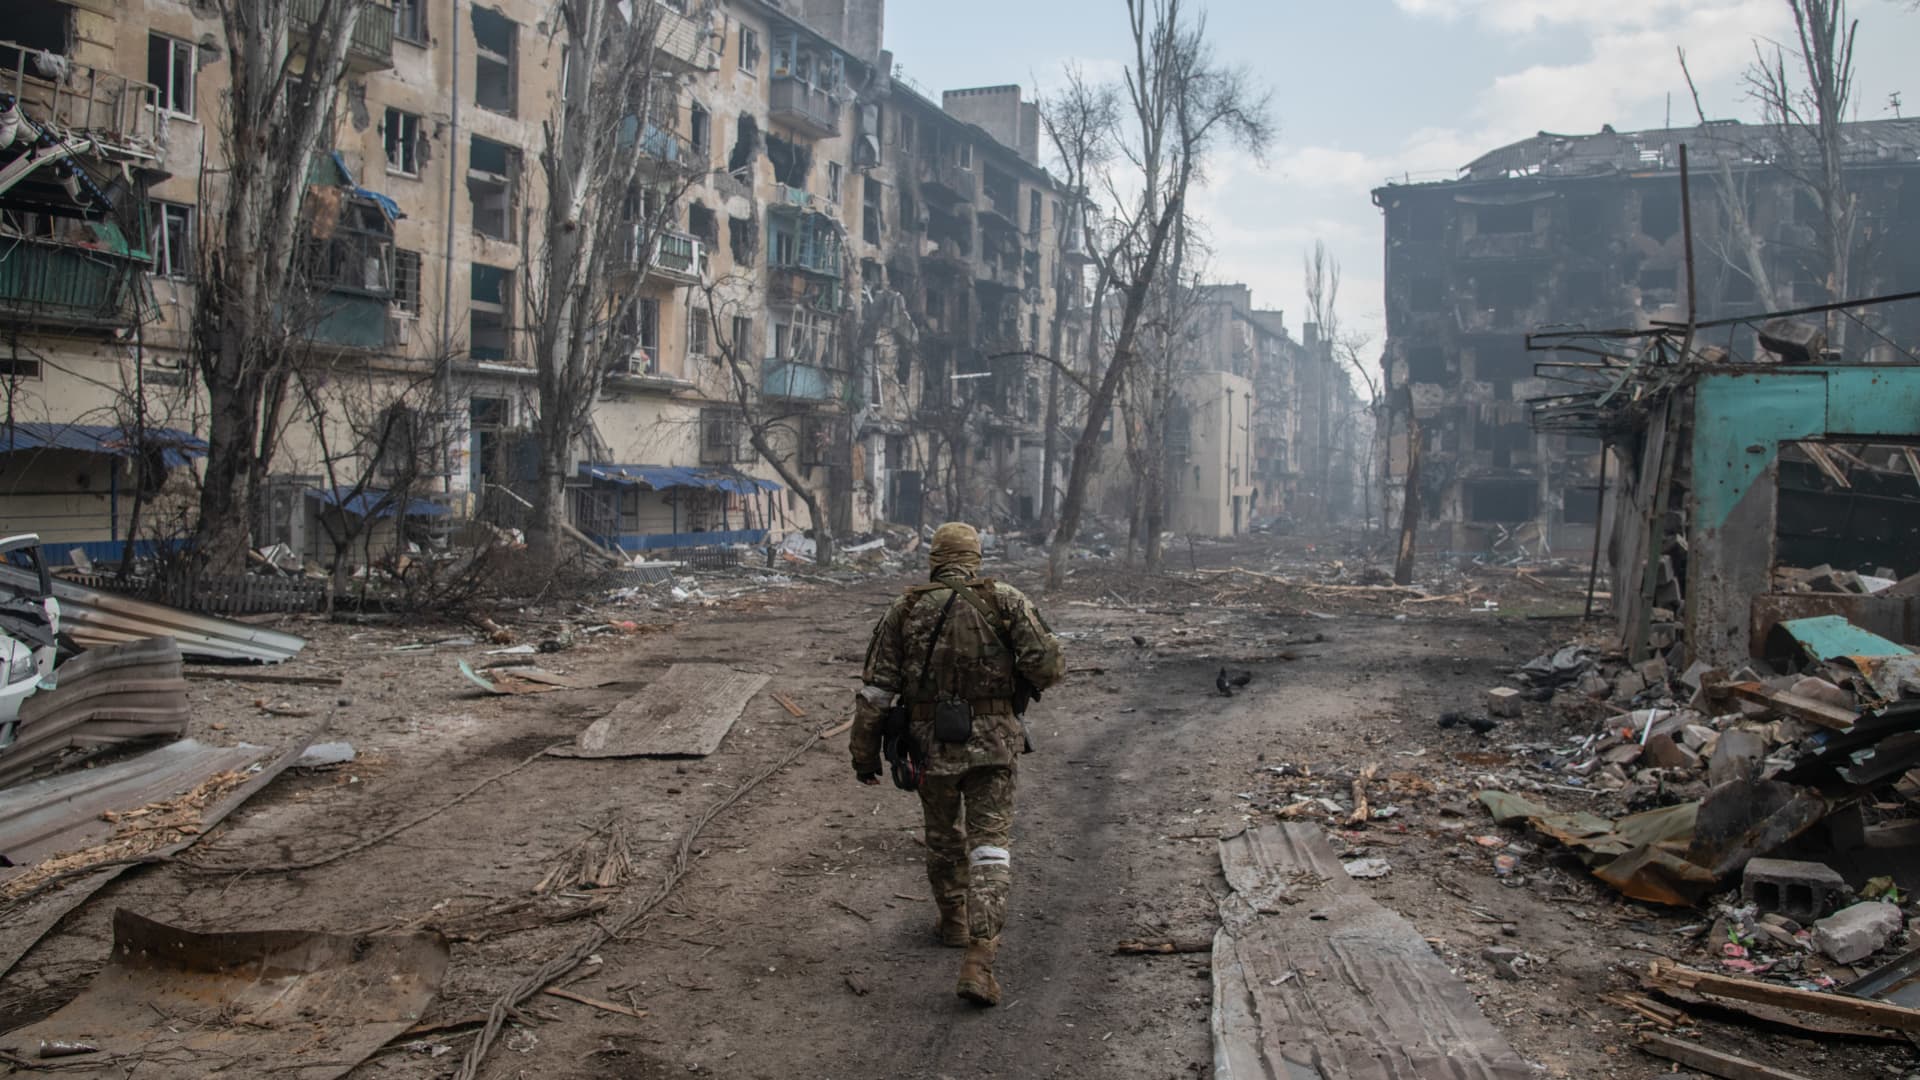 A Russian soldier walks amid the rubble in Mariupol's eastern side where fierce fighting between Russia/pro-Russia forces and Ukraine on March 15, 2022.